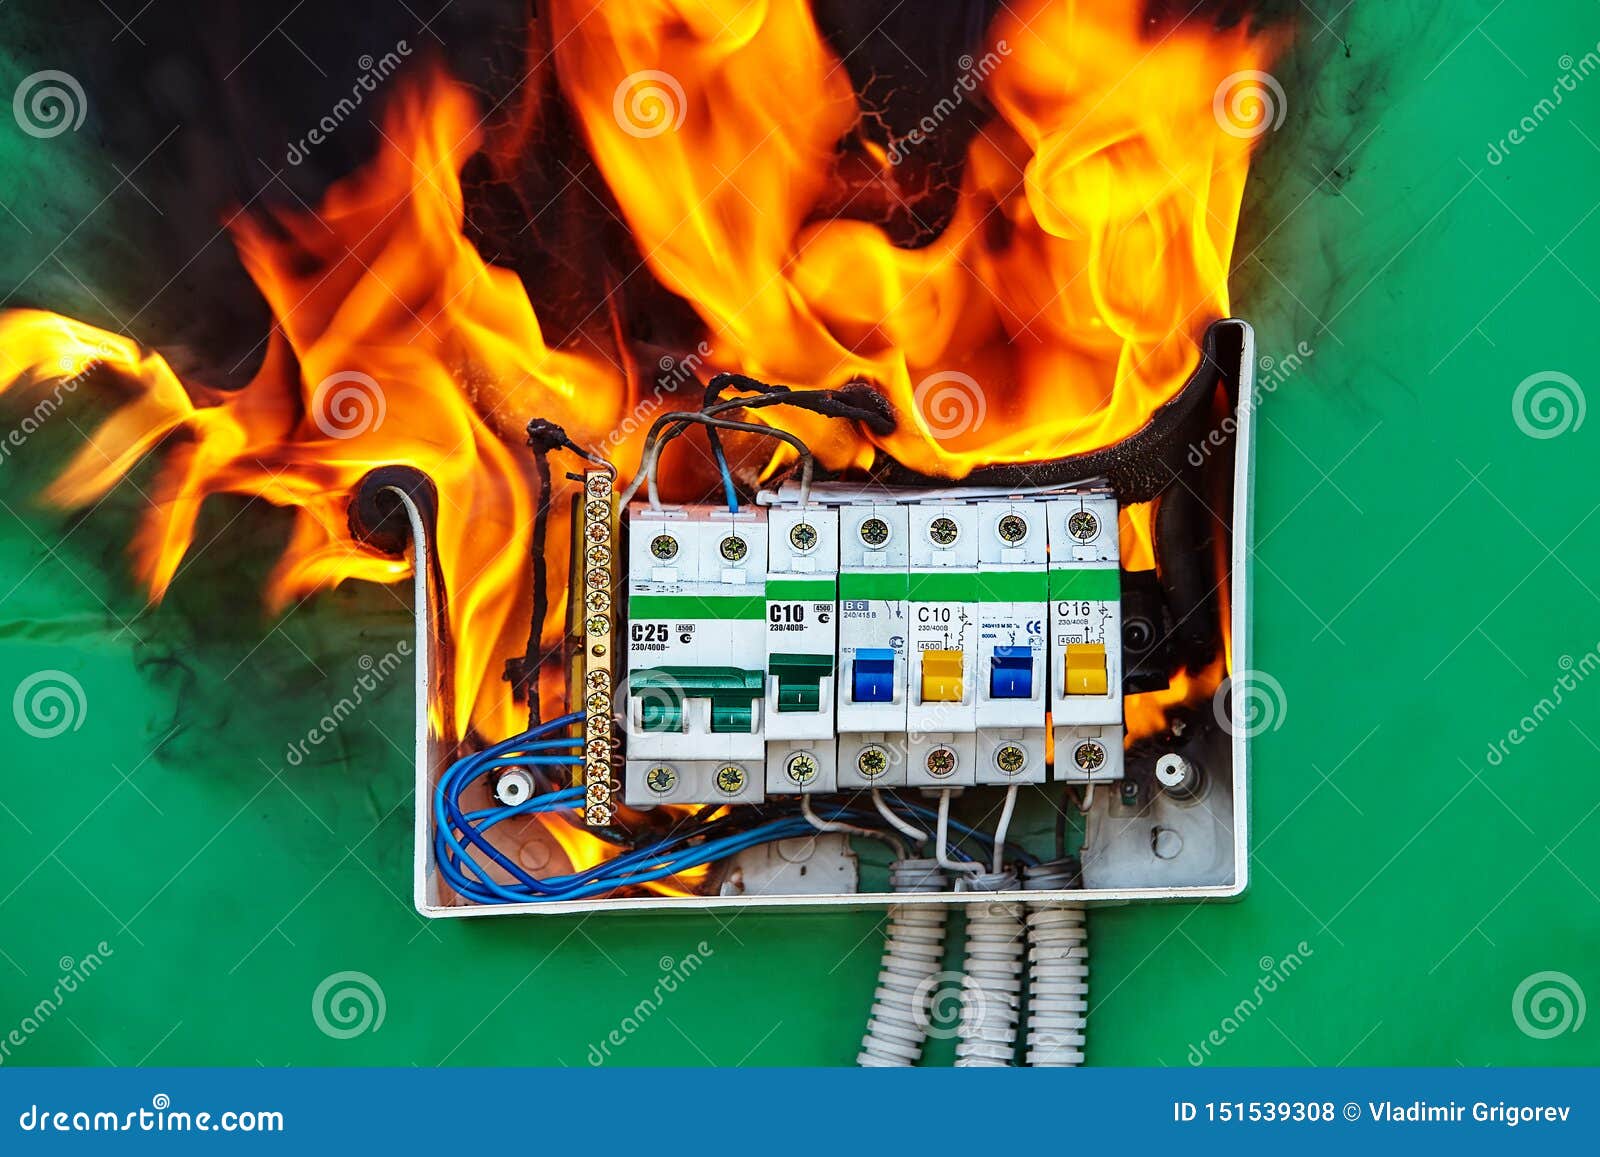 Home Electrical Fire Started in Distribution Board Stock Photo - Image of  home, fuse: 151539308